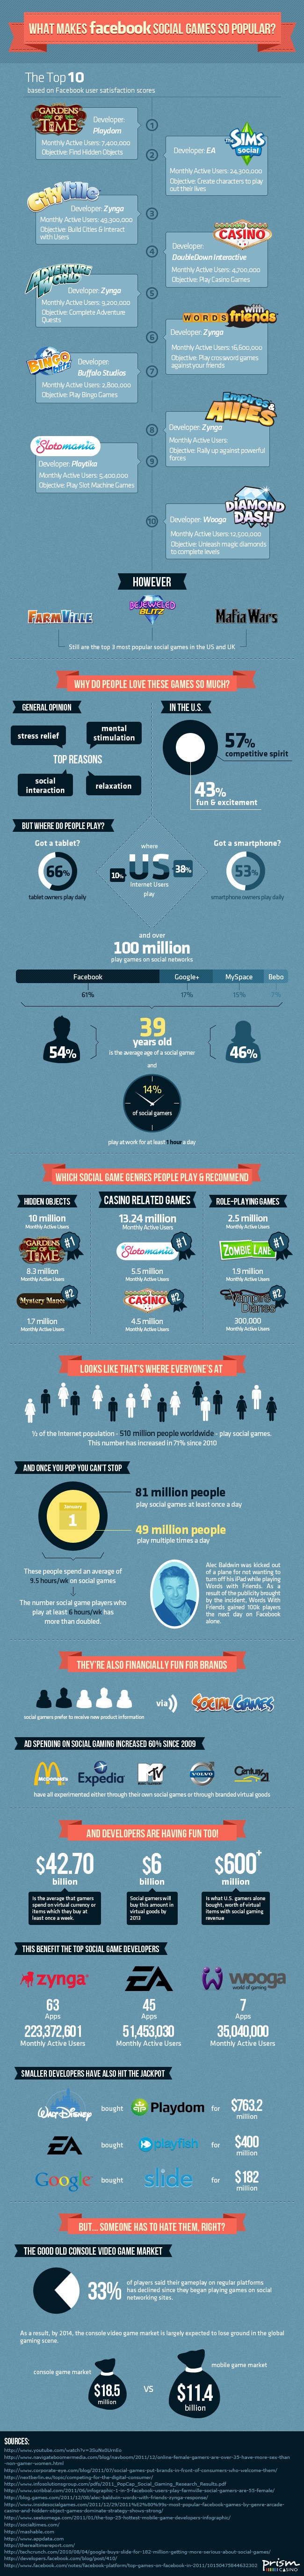 Top Social Games & Why They Are So Popular [Infographic]